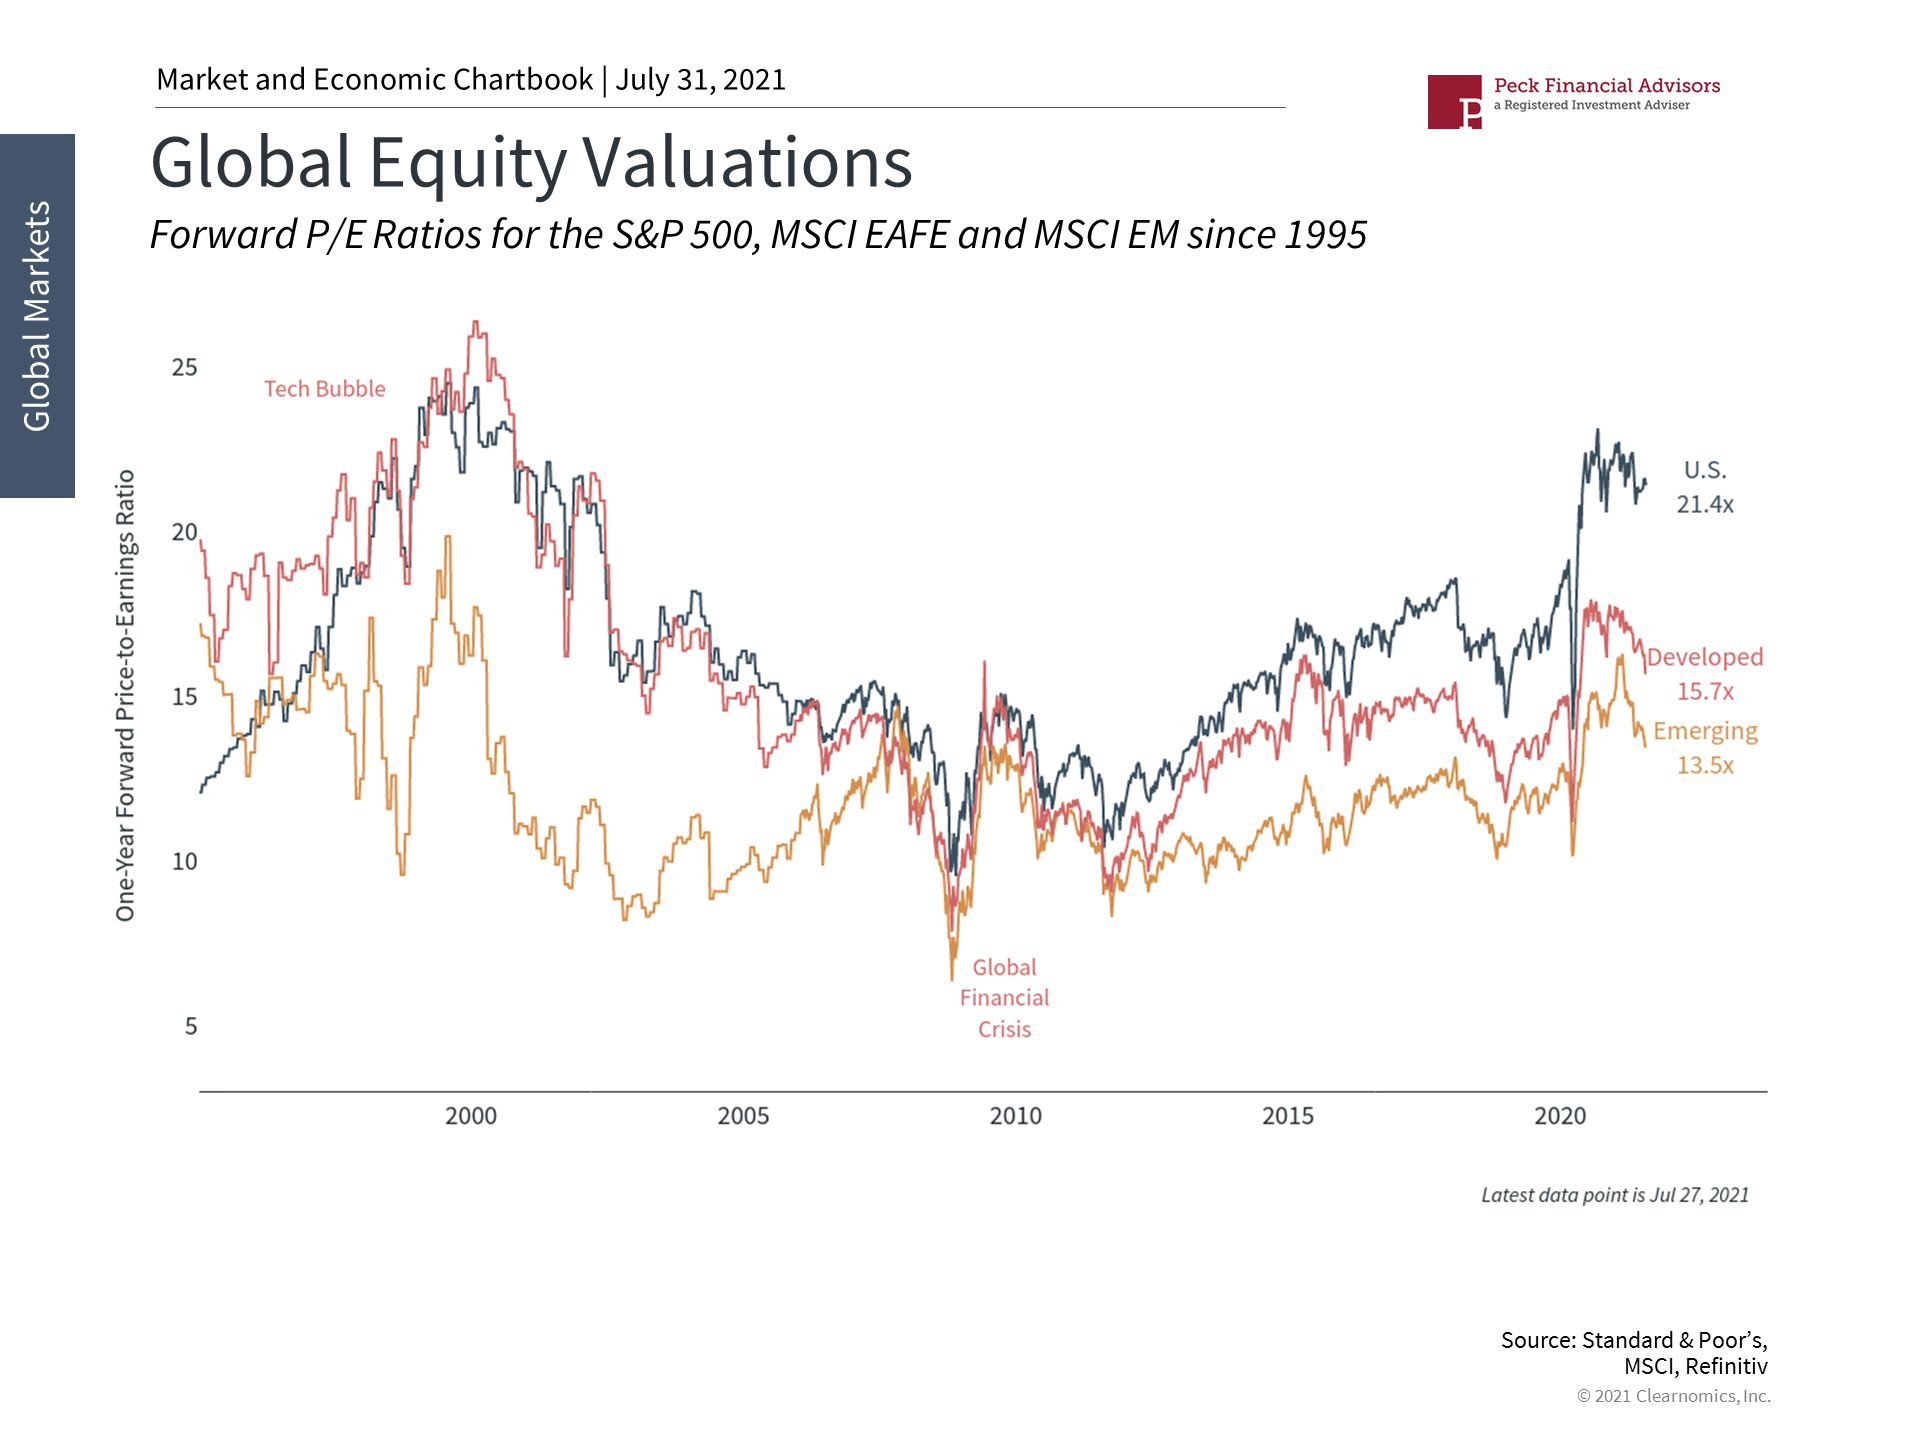 Global Equity Valuations 7_31_21.jpg